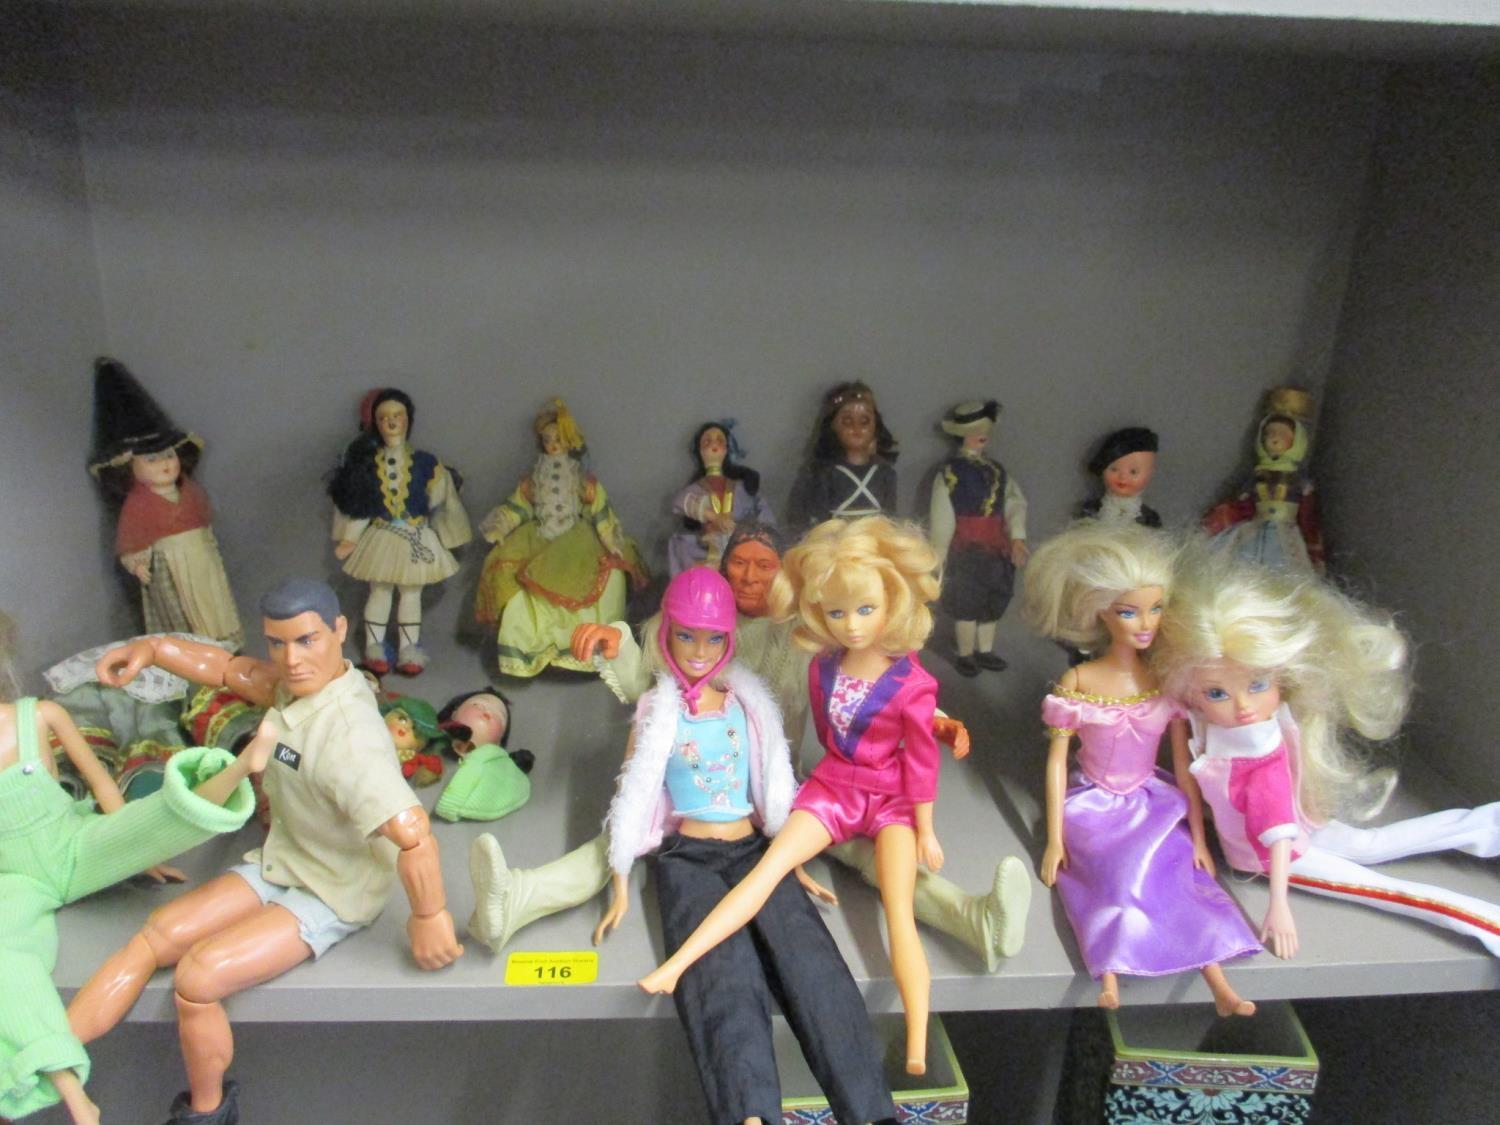 A quantity of vintage and retro dolls and action figures to include a 1996 Ken, Hasbro International